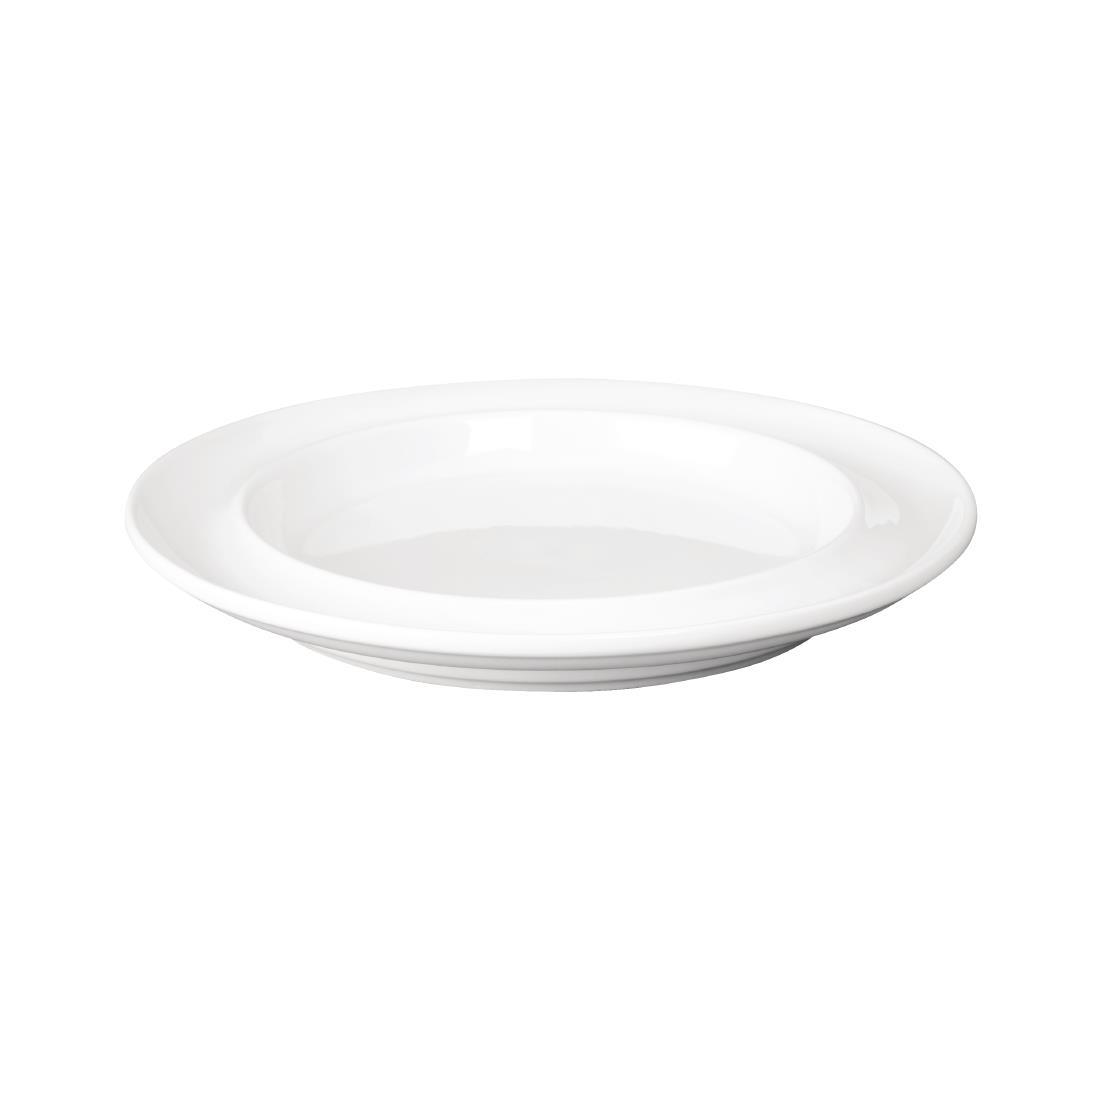 Olympia Heritage Raised Rim Plates White 203mm (Pack of 4) - DW152  - 2